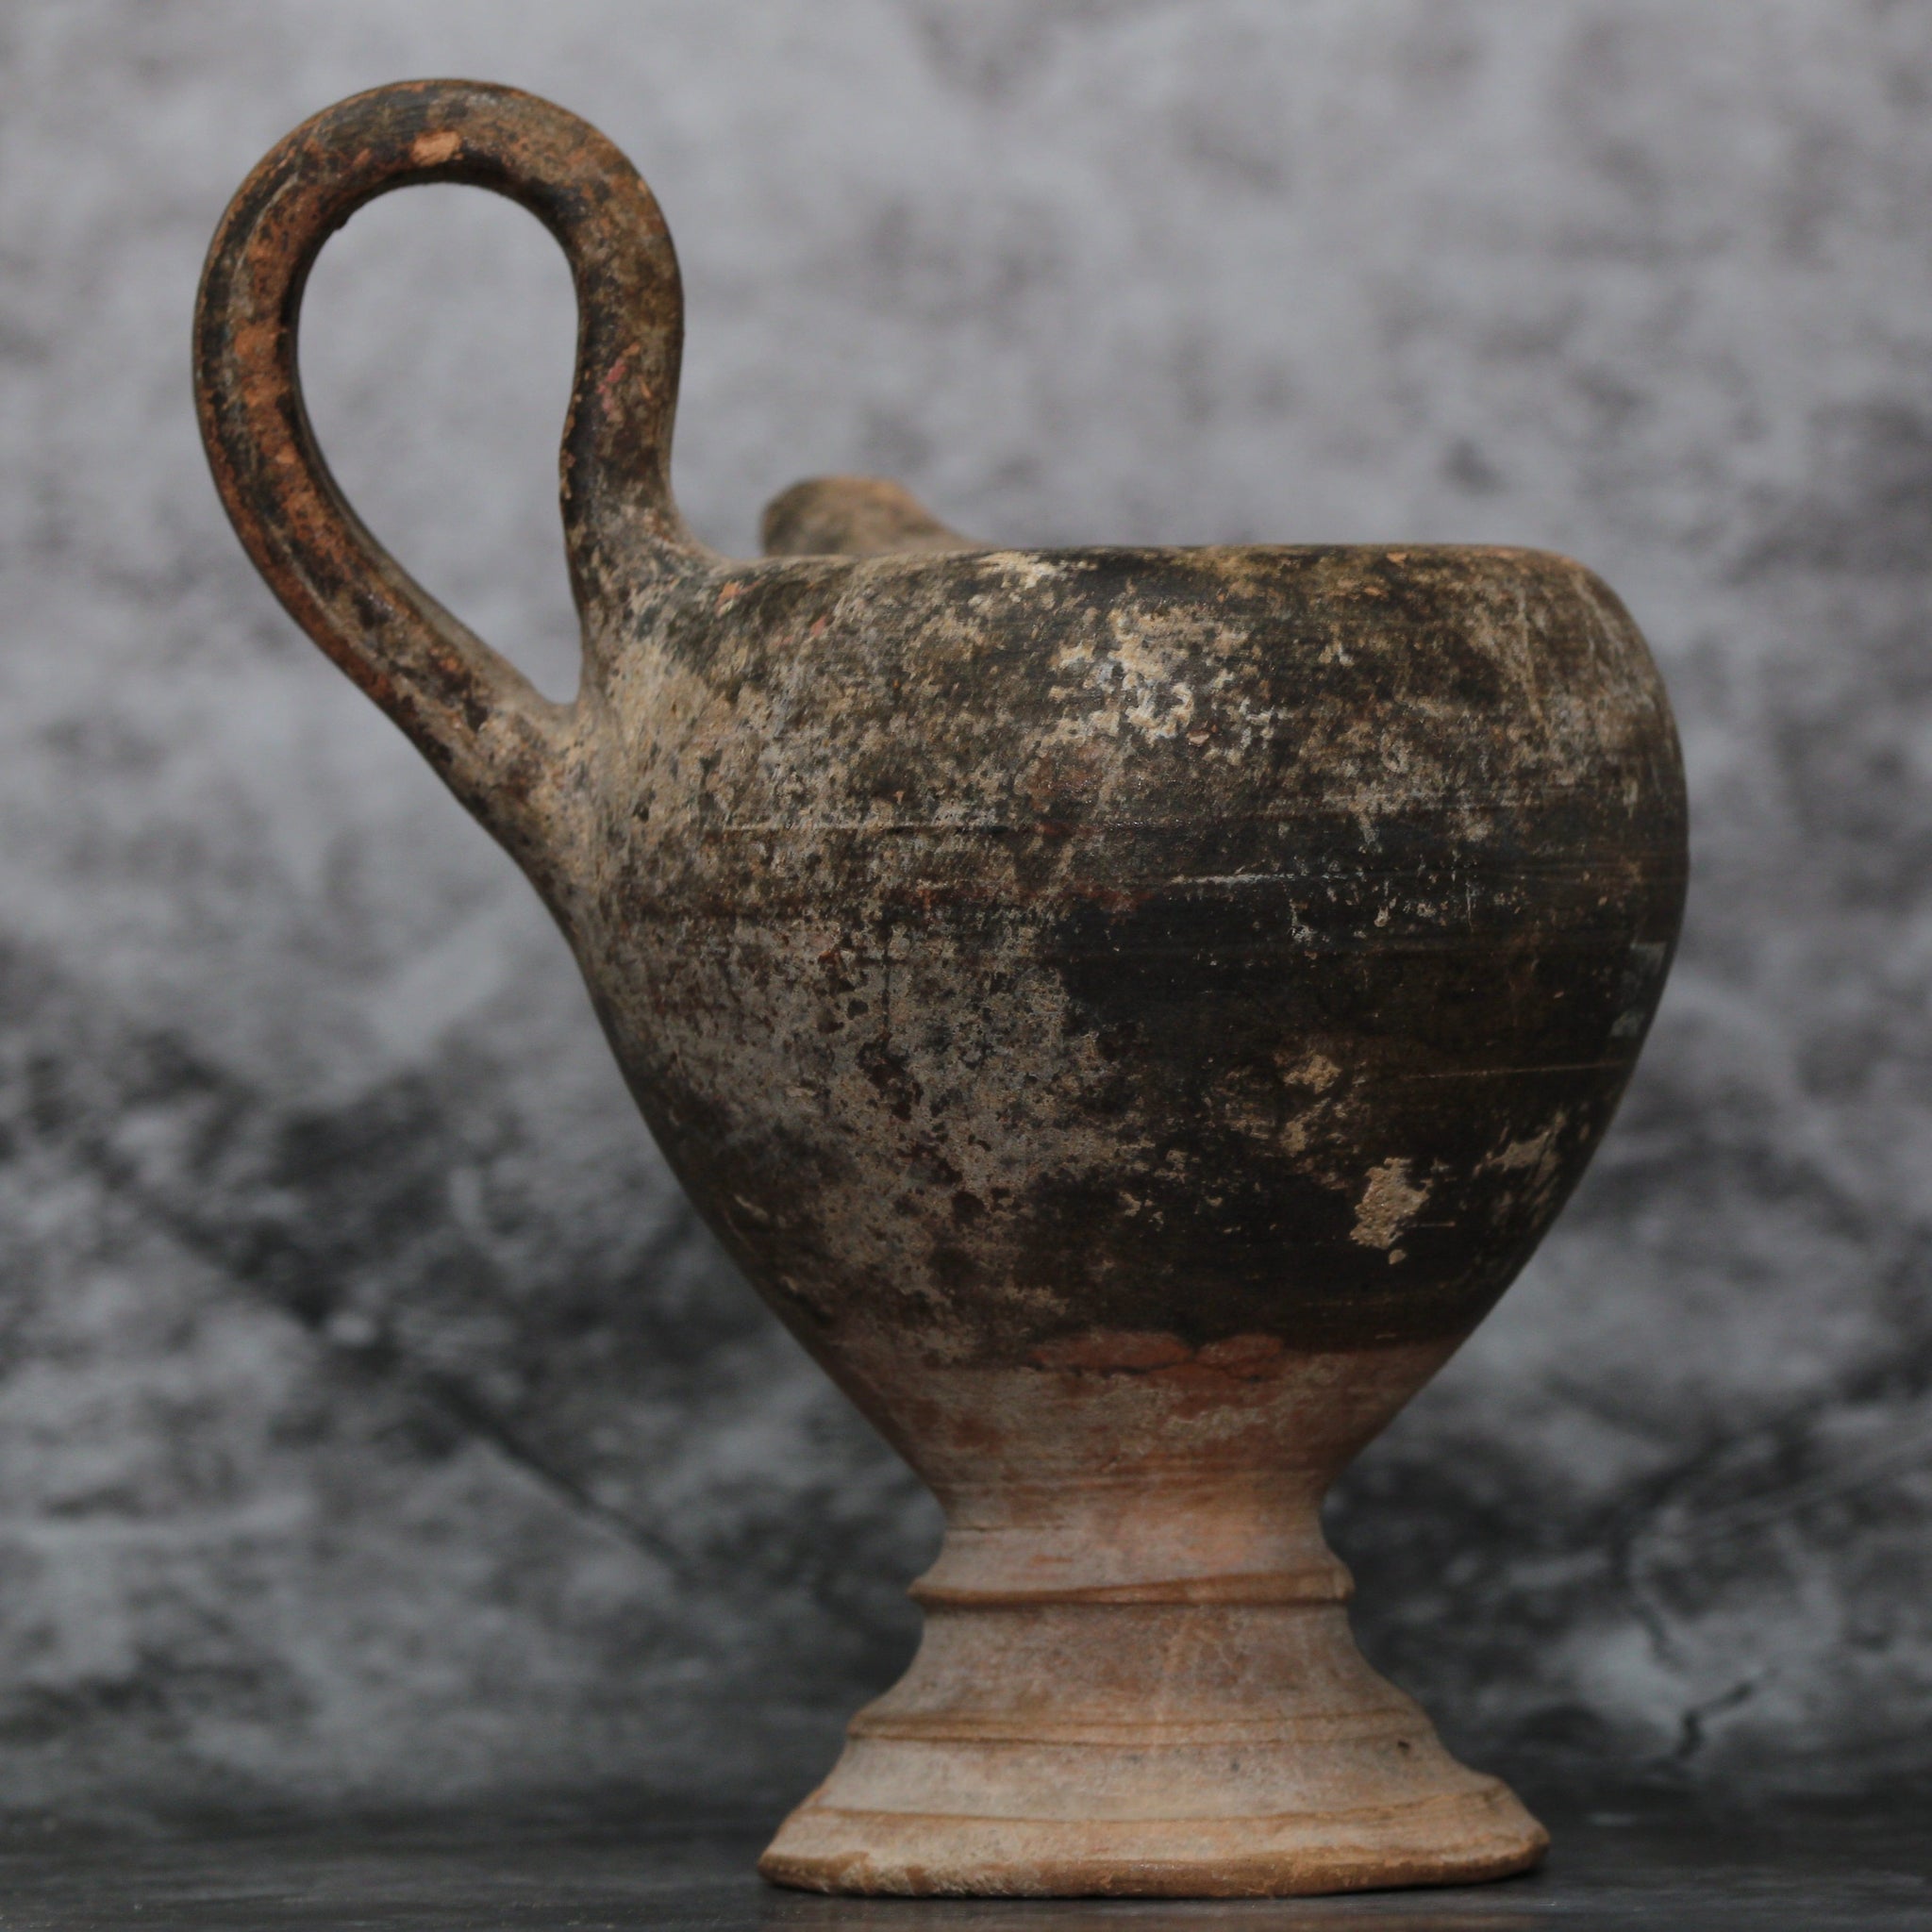 A Classical Oil Lamp Filler | Roman or Greek c. 4th Century BC - 1st Century AD